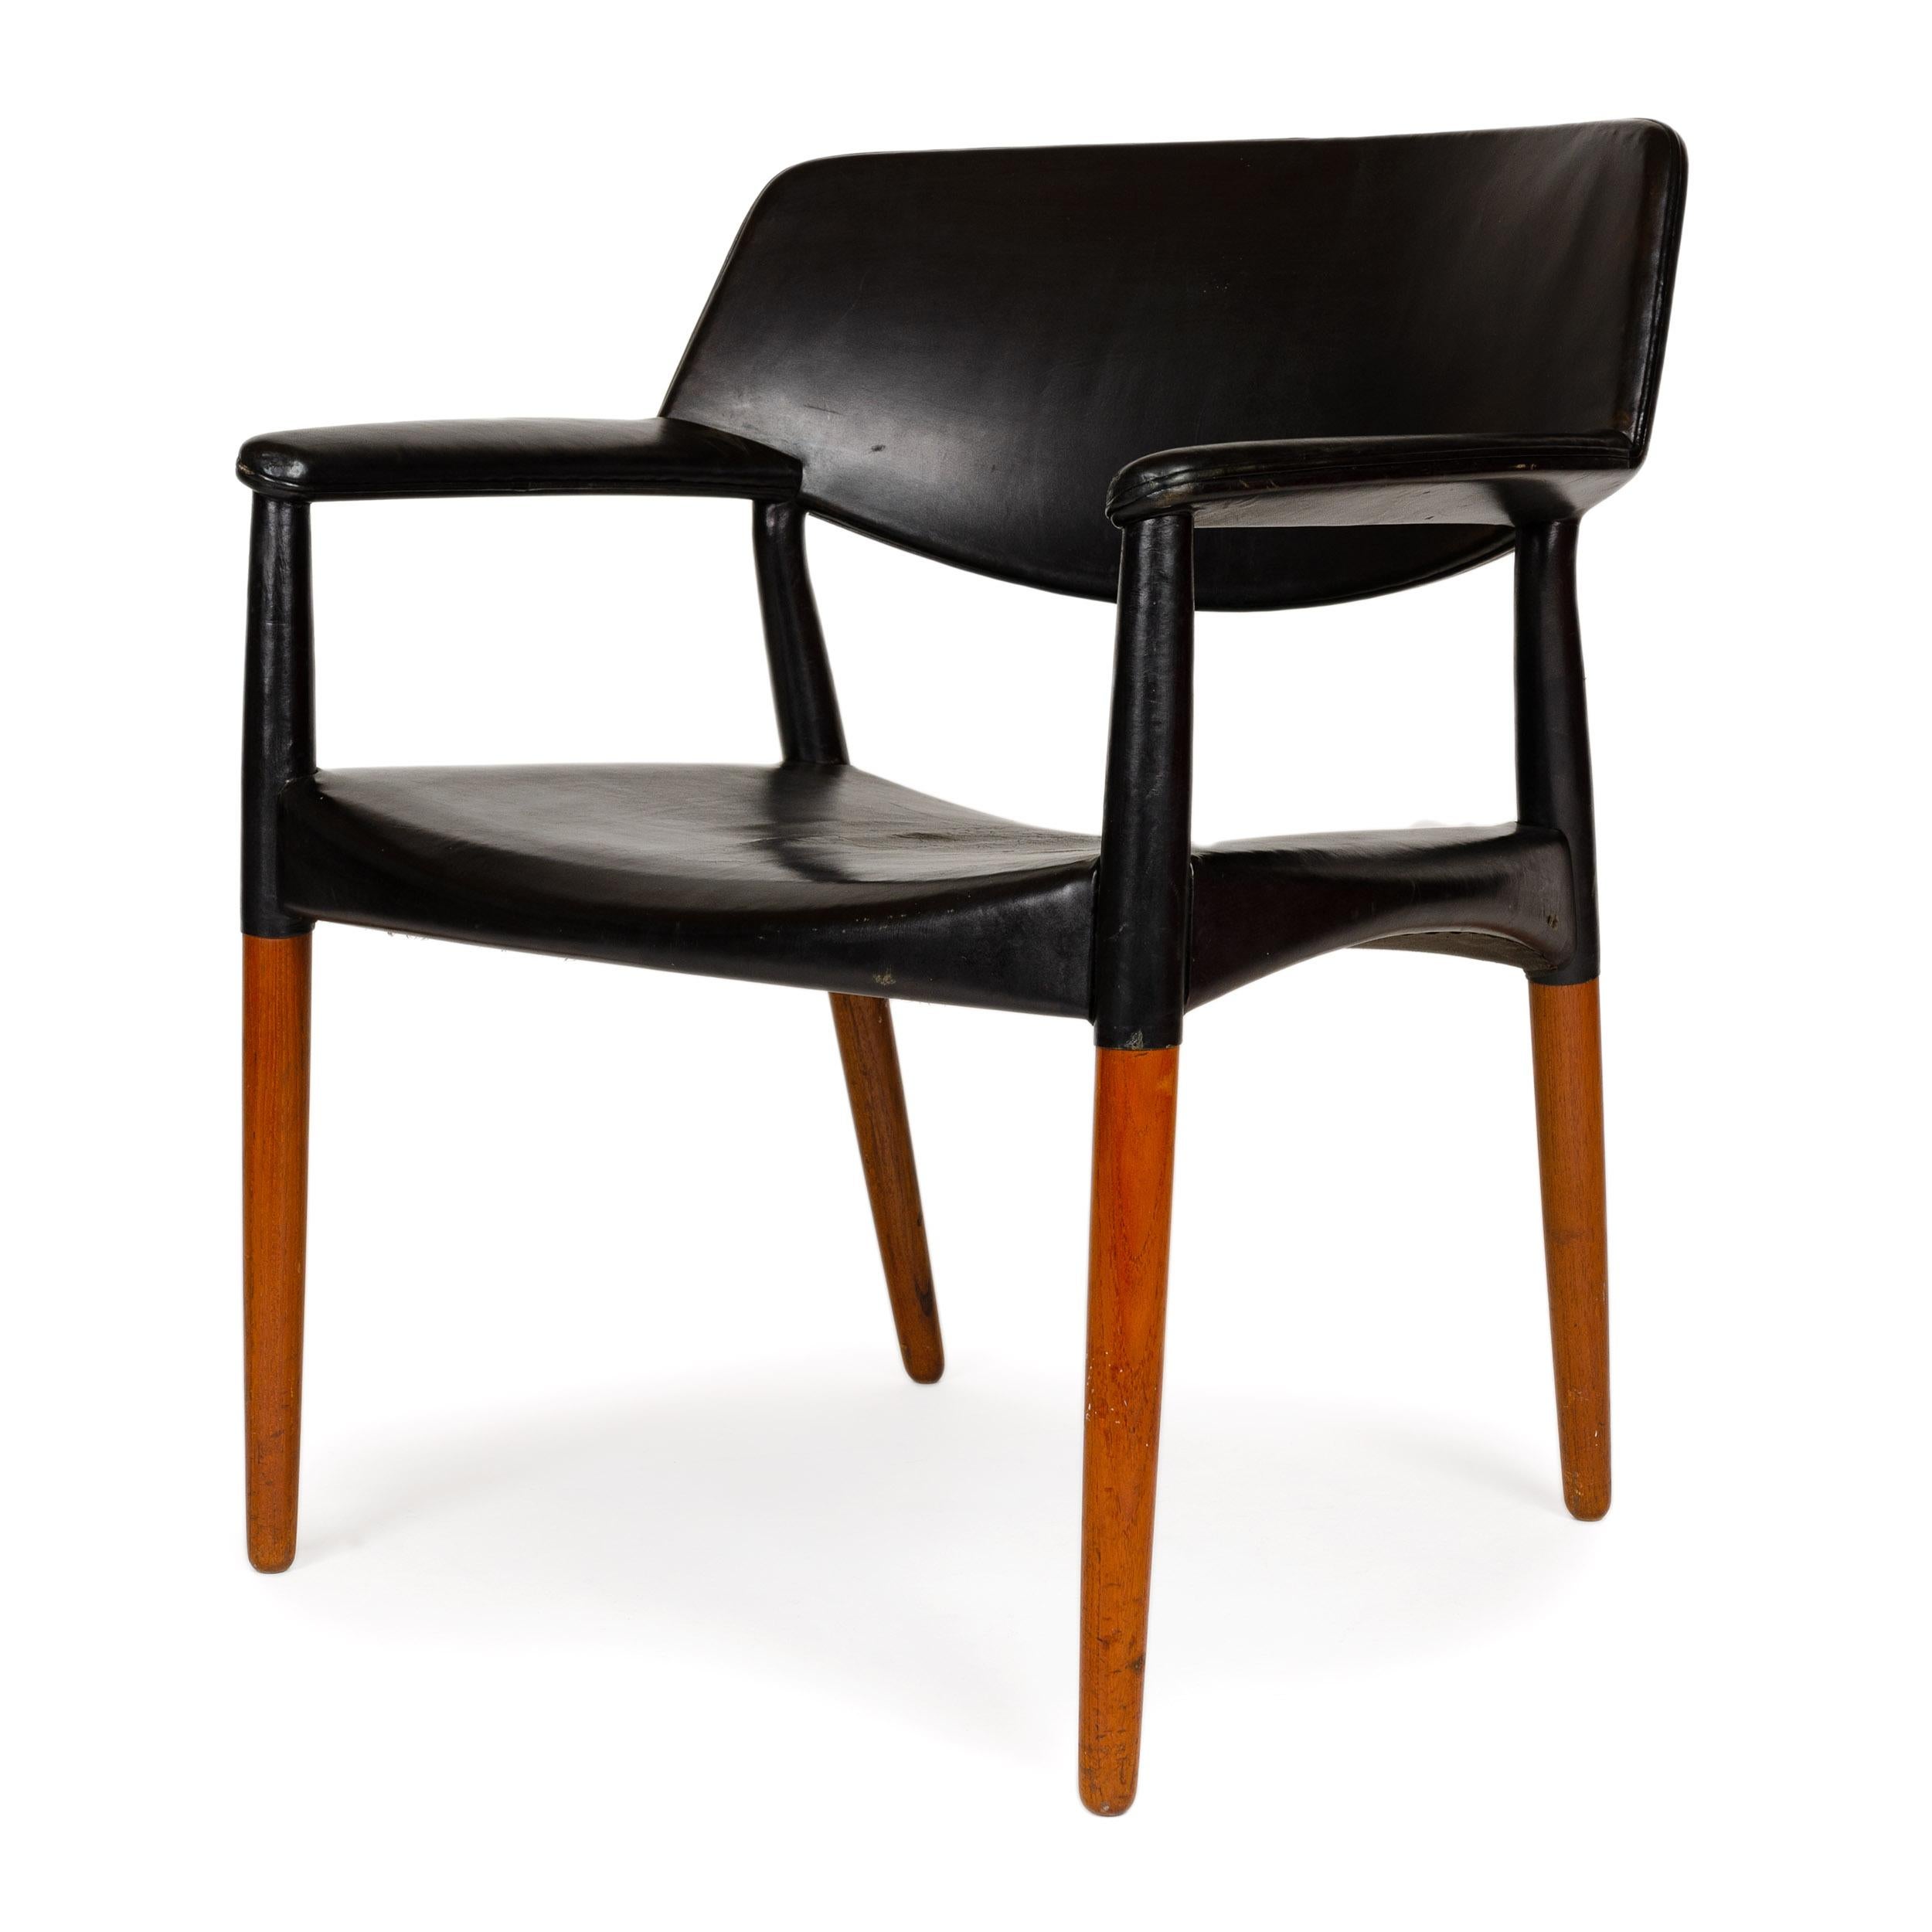 A comfortably wide (27.5’’) conference chair in solid teak and black leather. The designers characteristically clad the upper half of the chair in black leather while the exposed wood of the lower half is in natural teak. A gentle curve under the